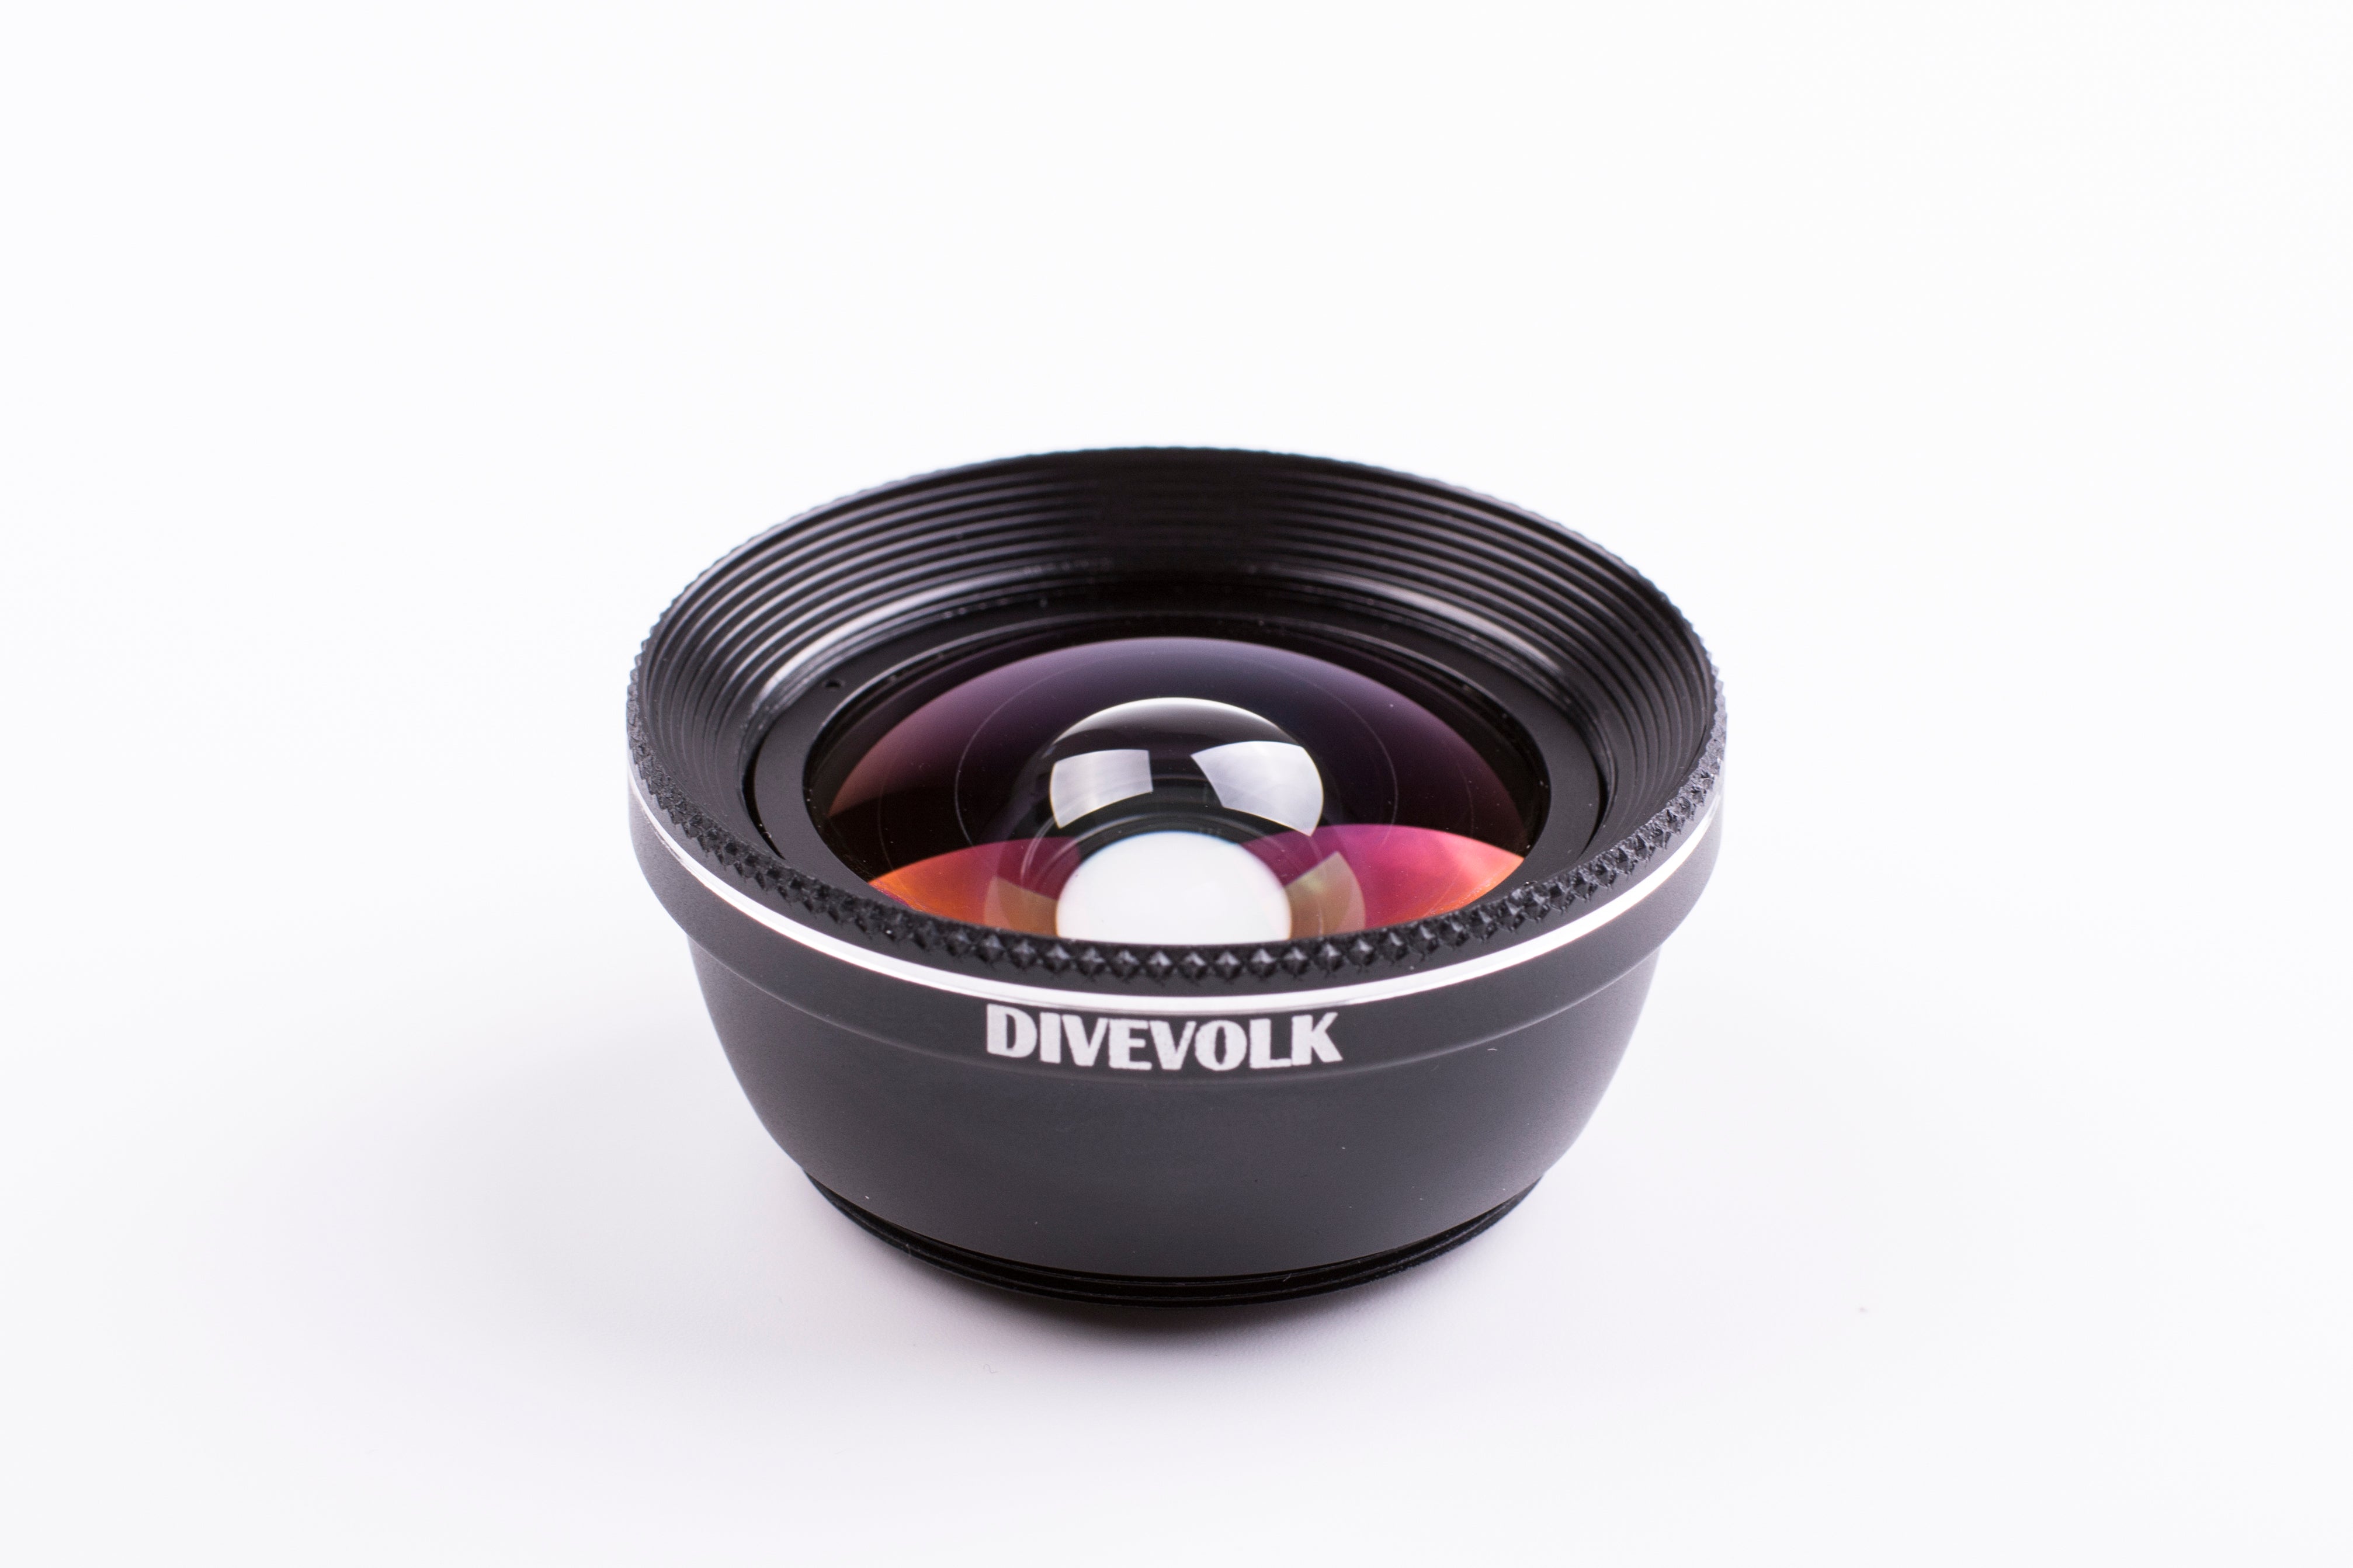 Divevolk Seatouch 3 Pro Wide Angle Wet Lens 105 Degree